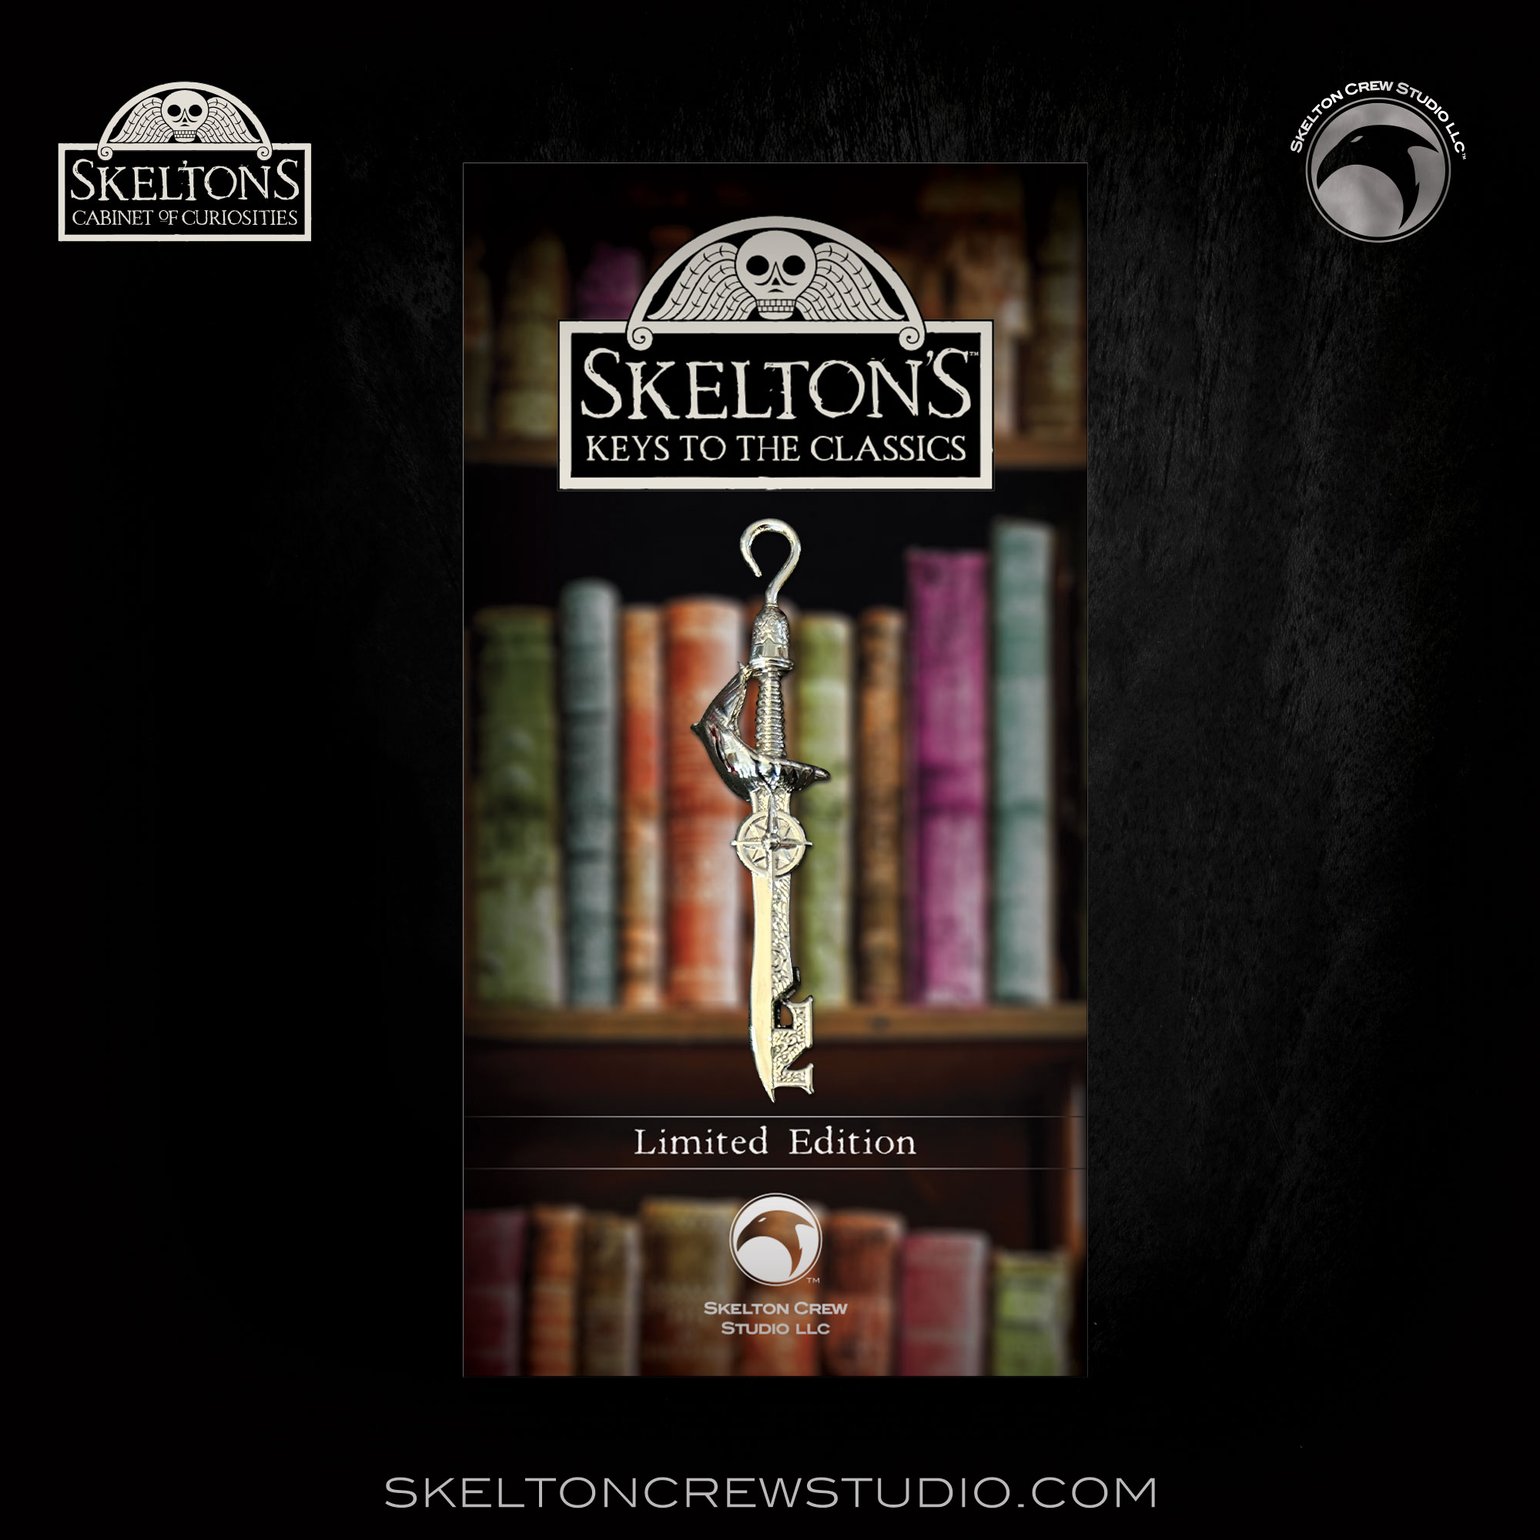 Image of Skelton's Keys to the Classics: Limited Edition Key to Neverland Pin!